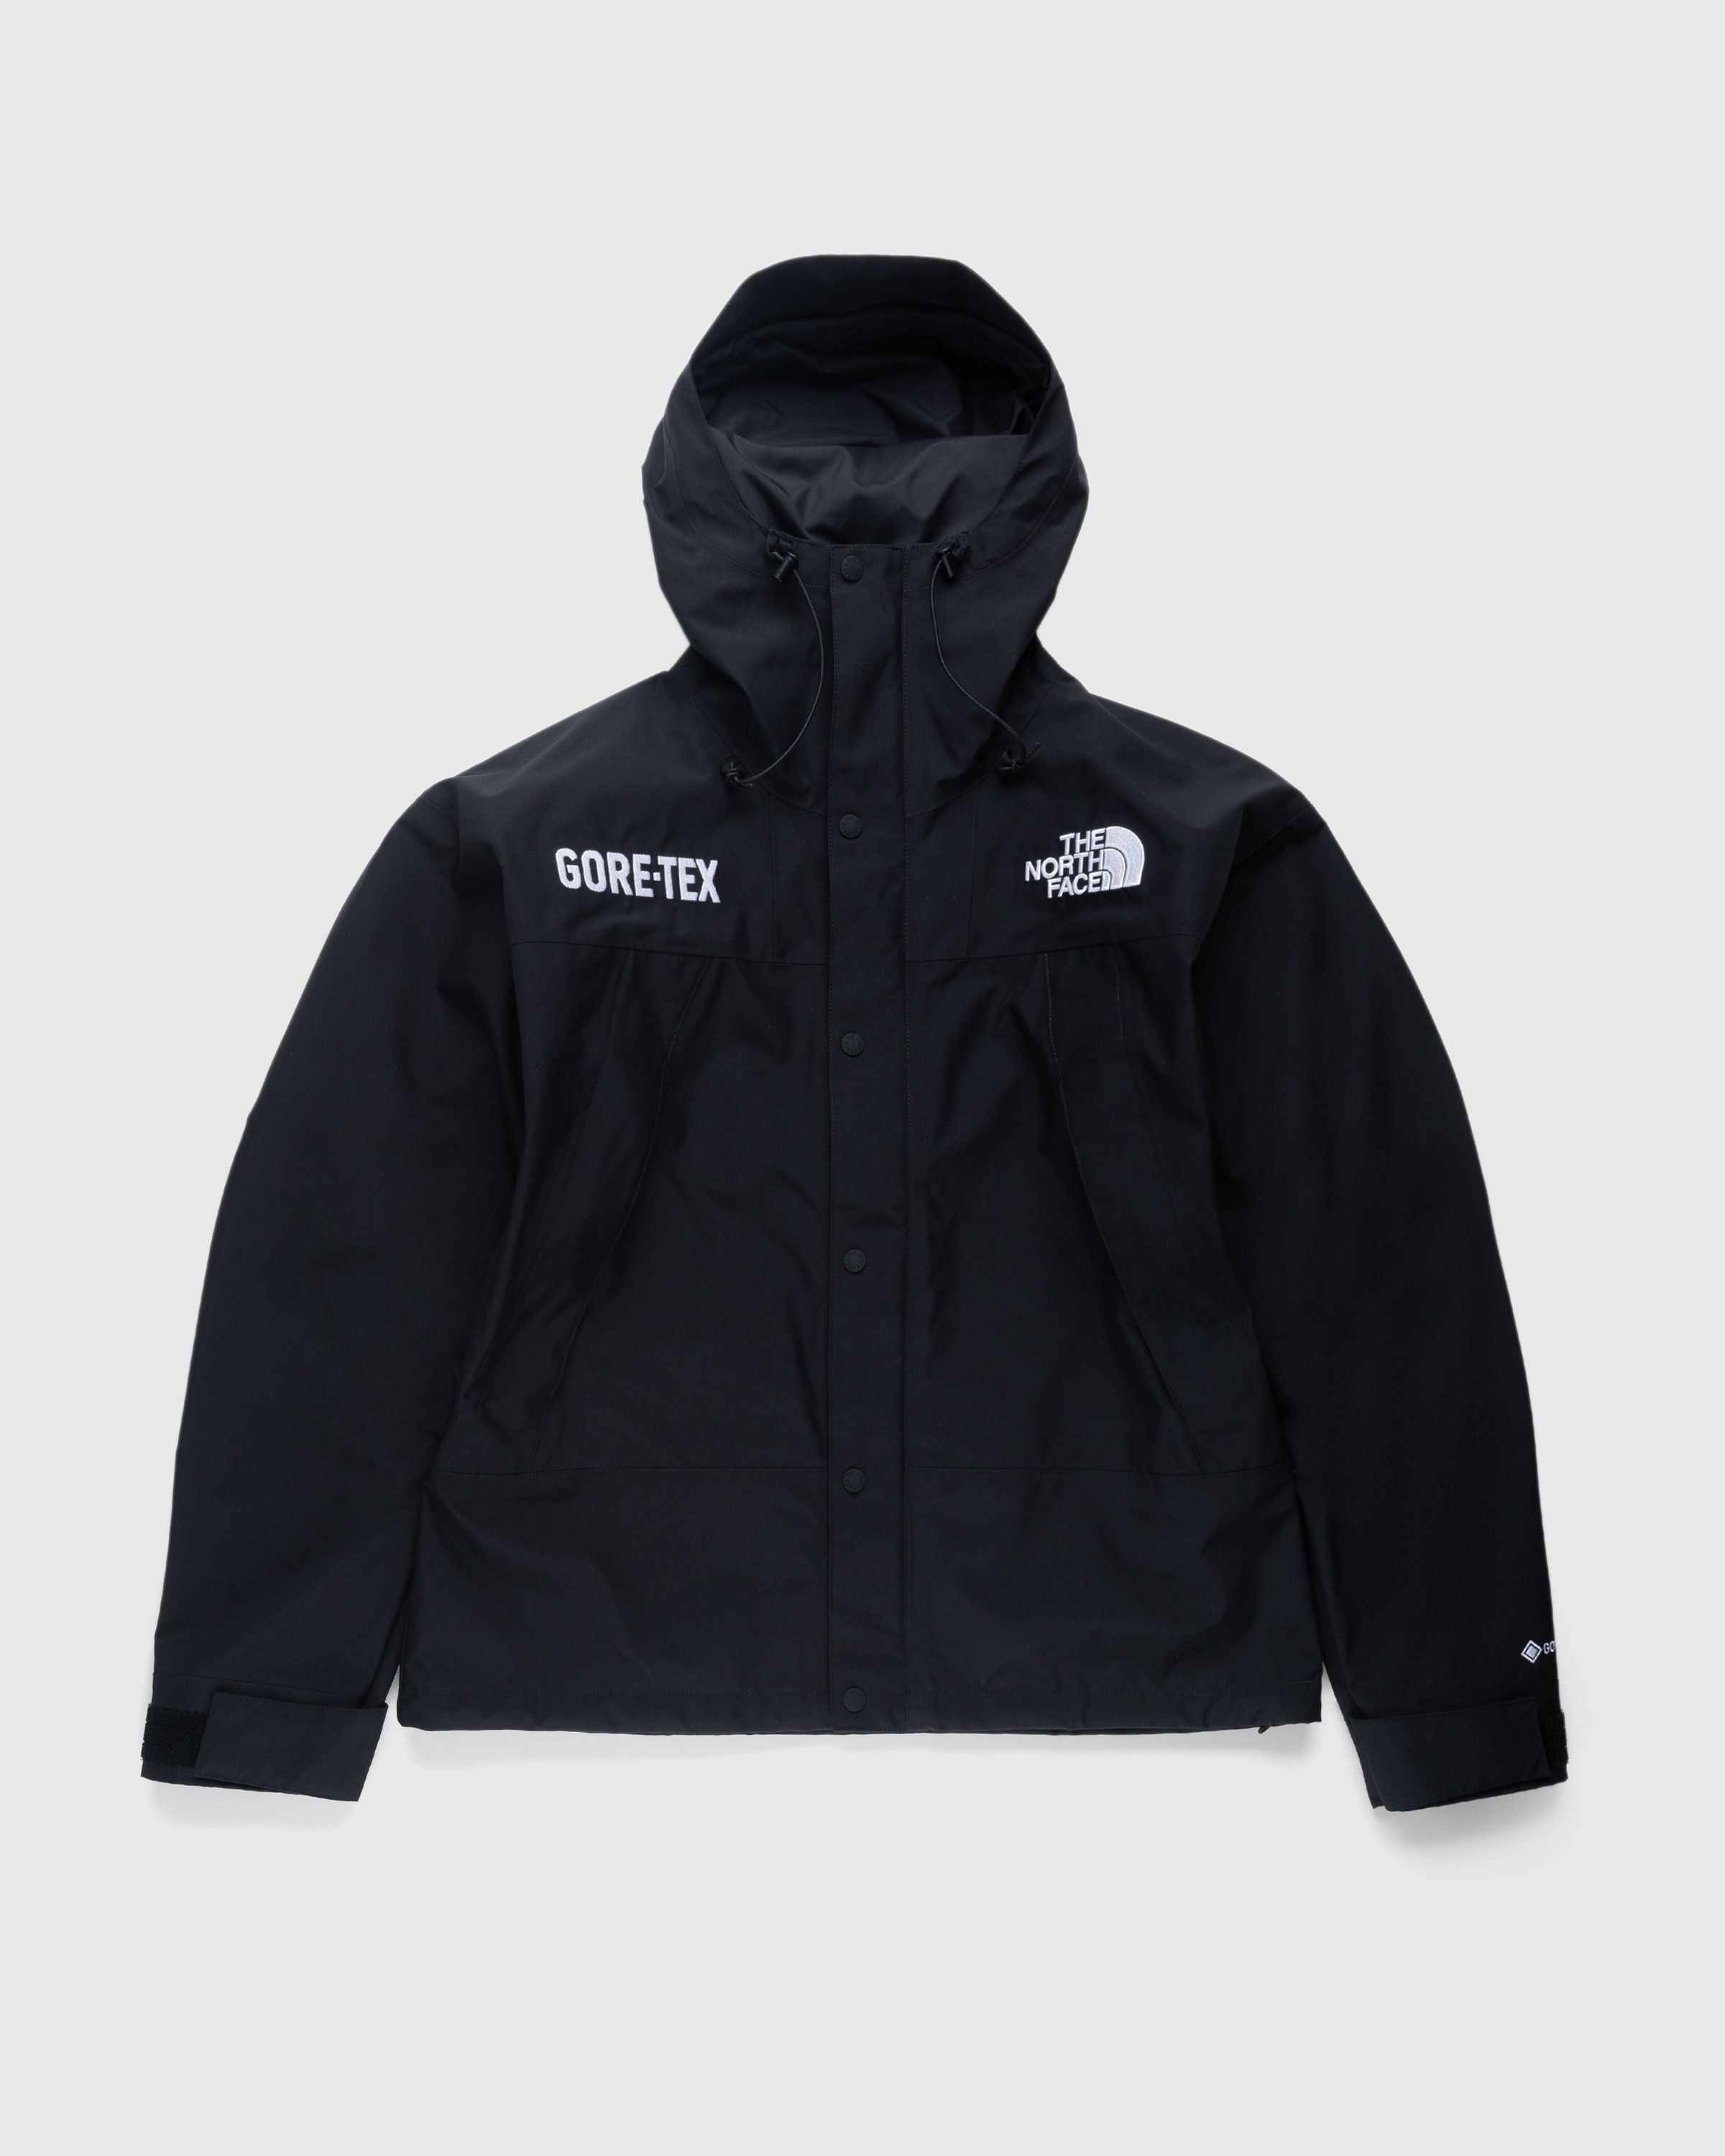 The North Face - Gore-Tex Mountain Jacket Black - Clothing - Black - Image 1